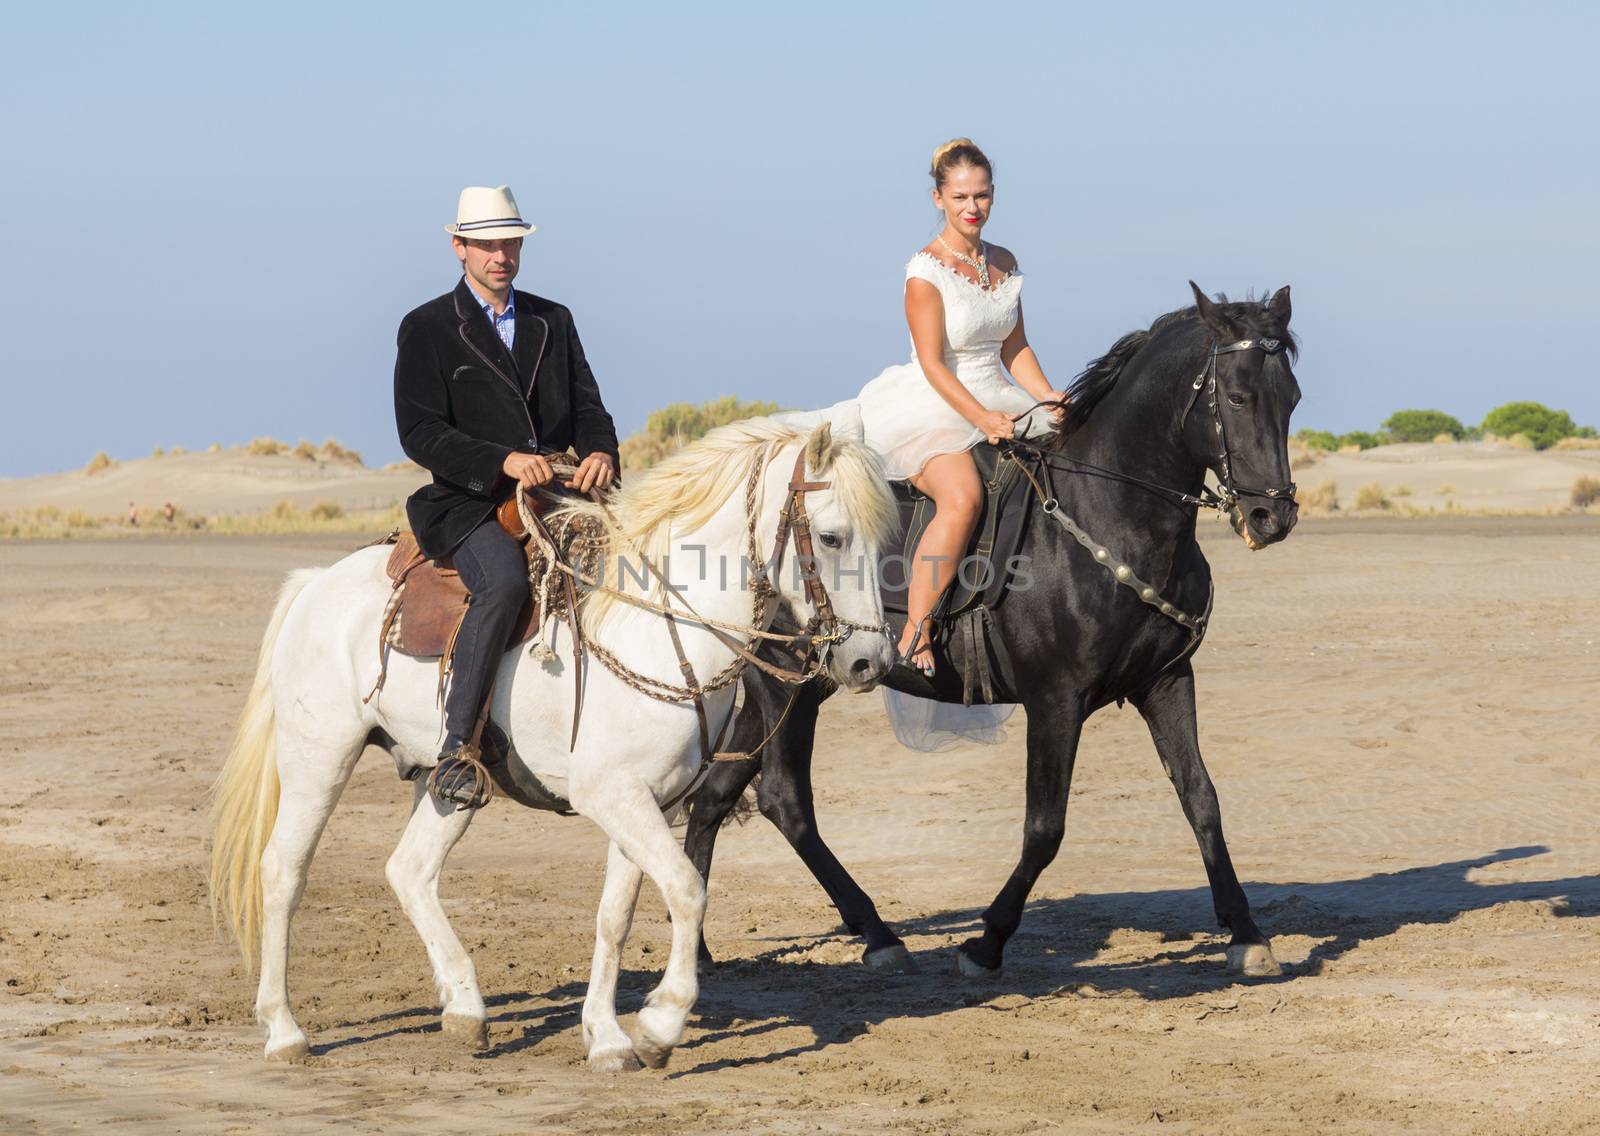 marrieds and horses on a beach in the south of France